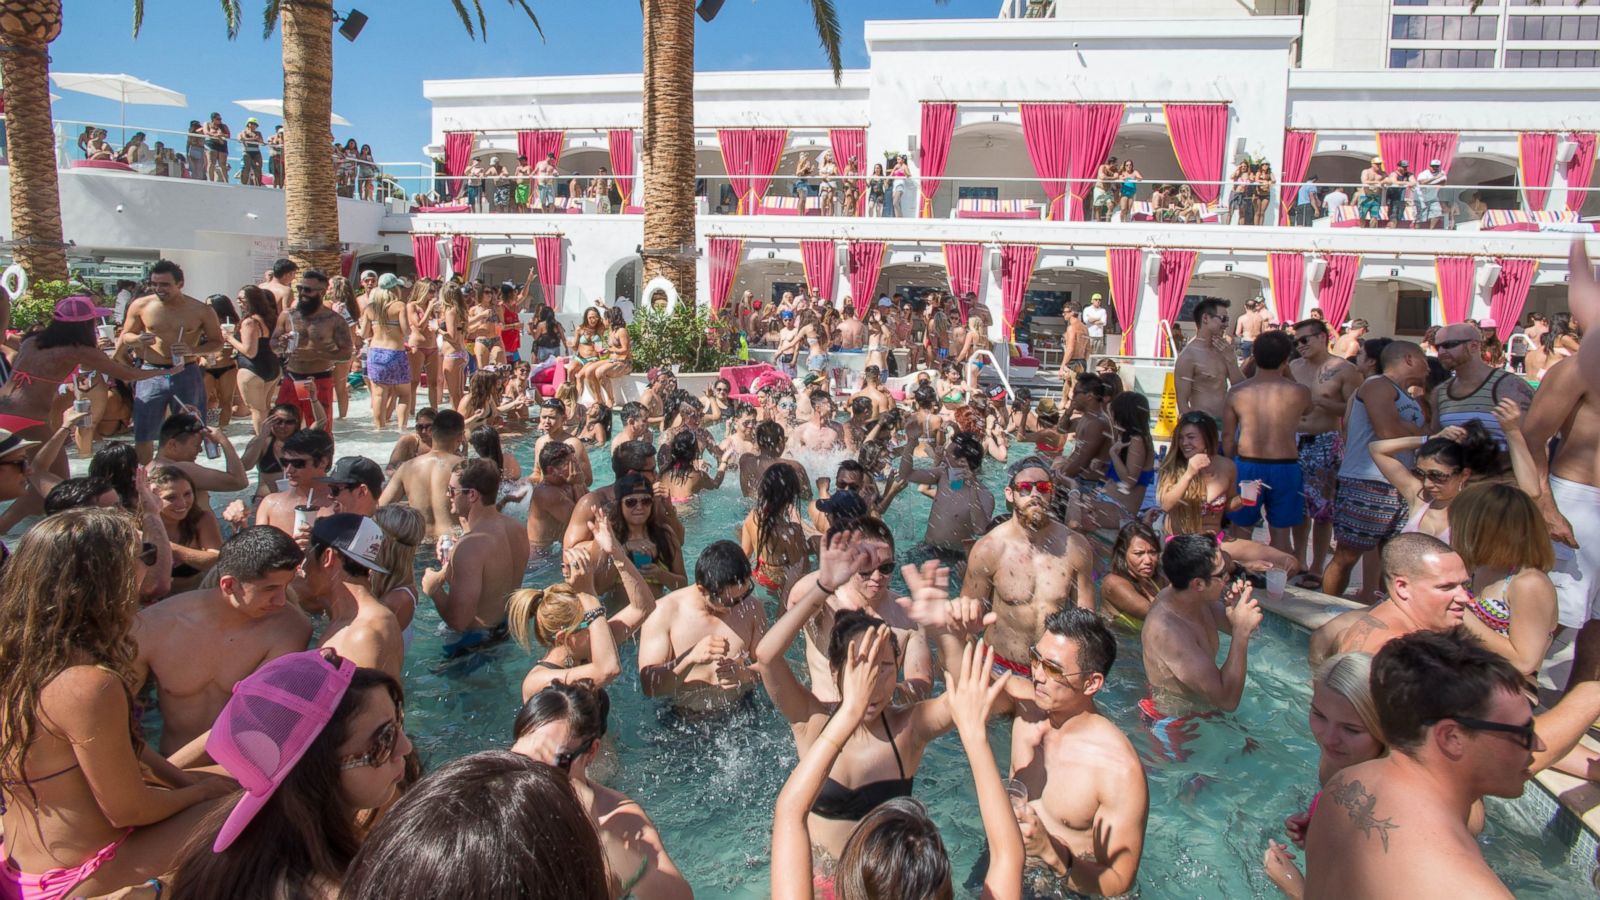 Las Vegas pool parties heat up in time for summer